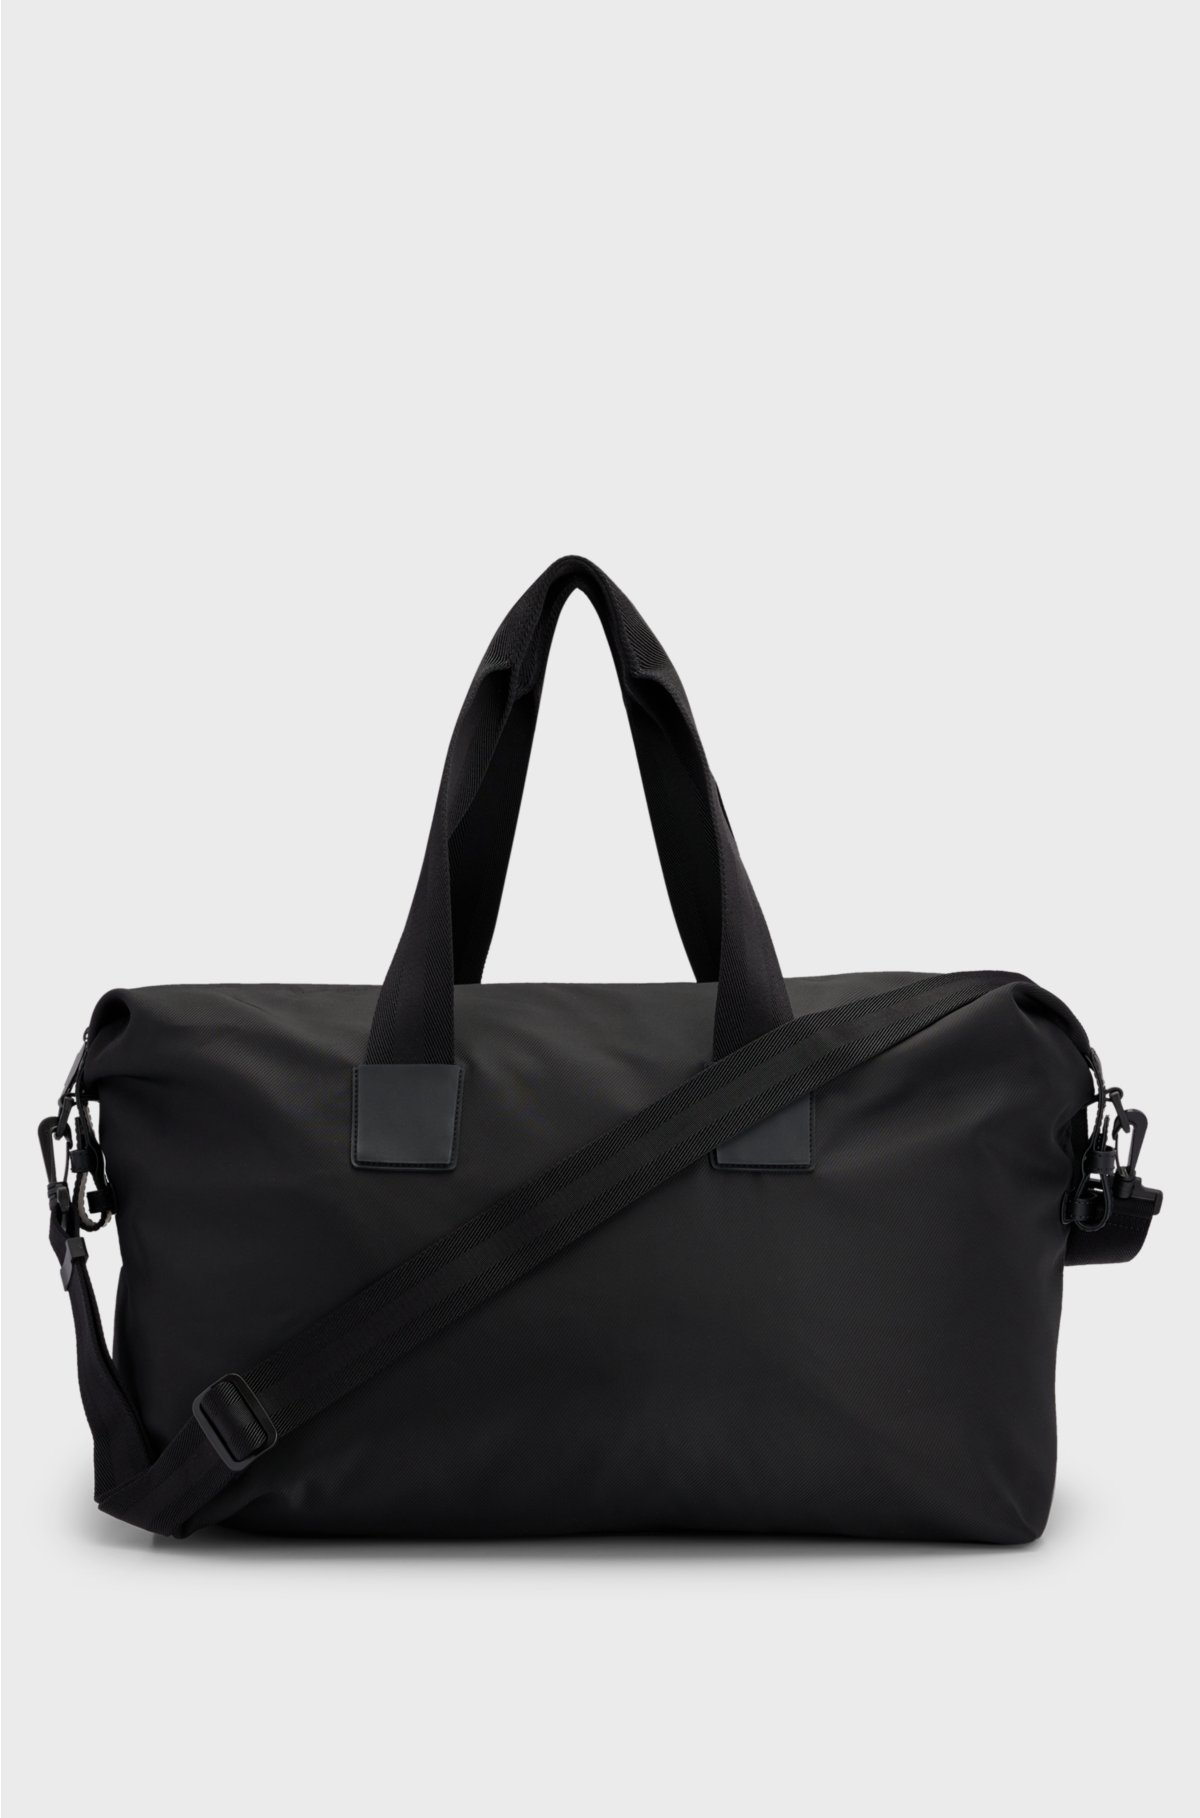 Logo holdall in patterned fabric, Black